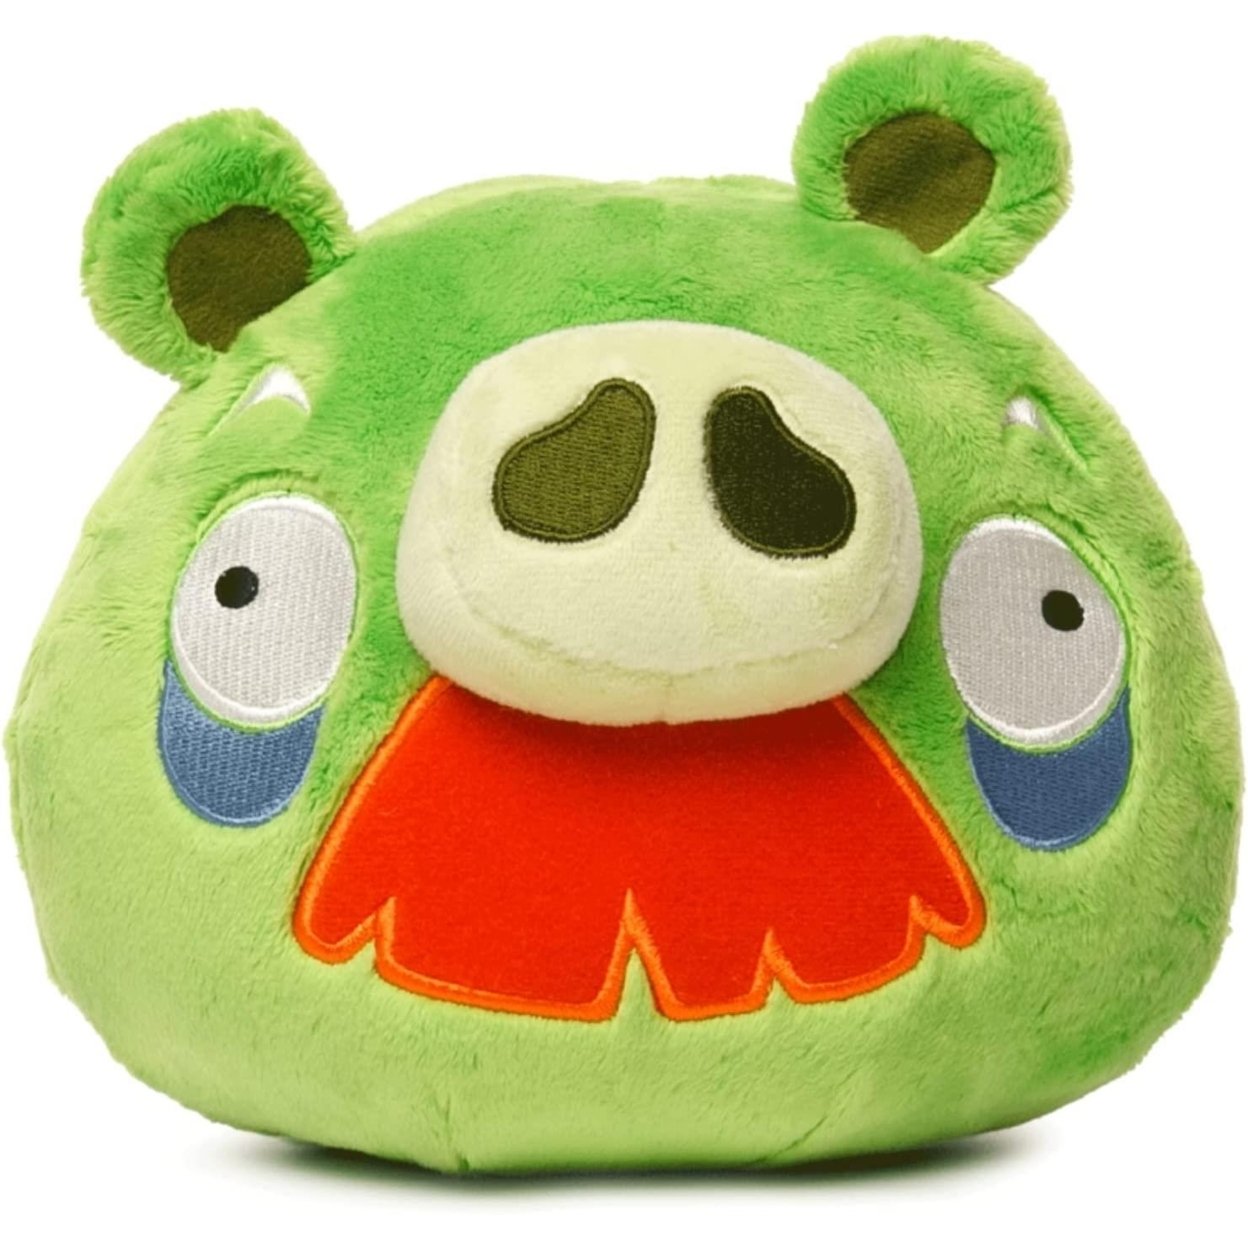 Angry Birds Green Moustache Foreman Pig Plush Bad Piggies 7 Pillow Doll Soft Toy Mighty Mojo